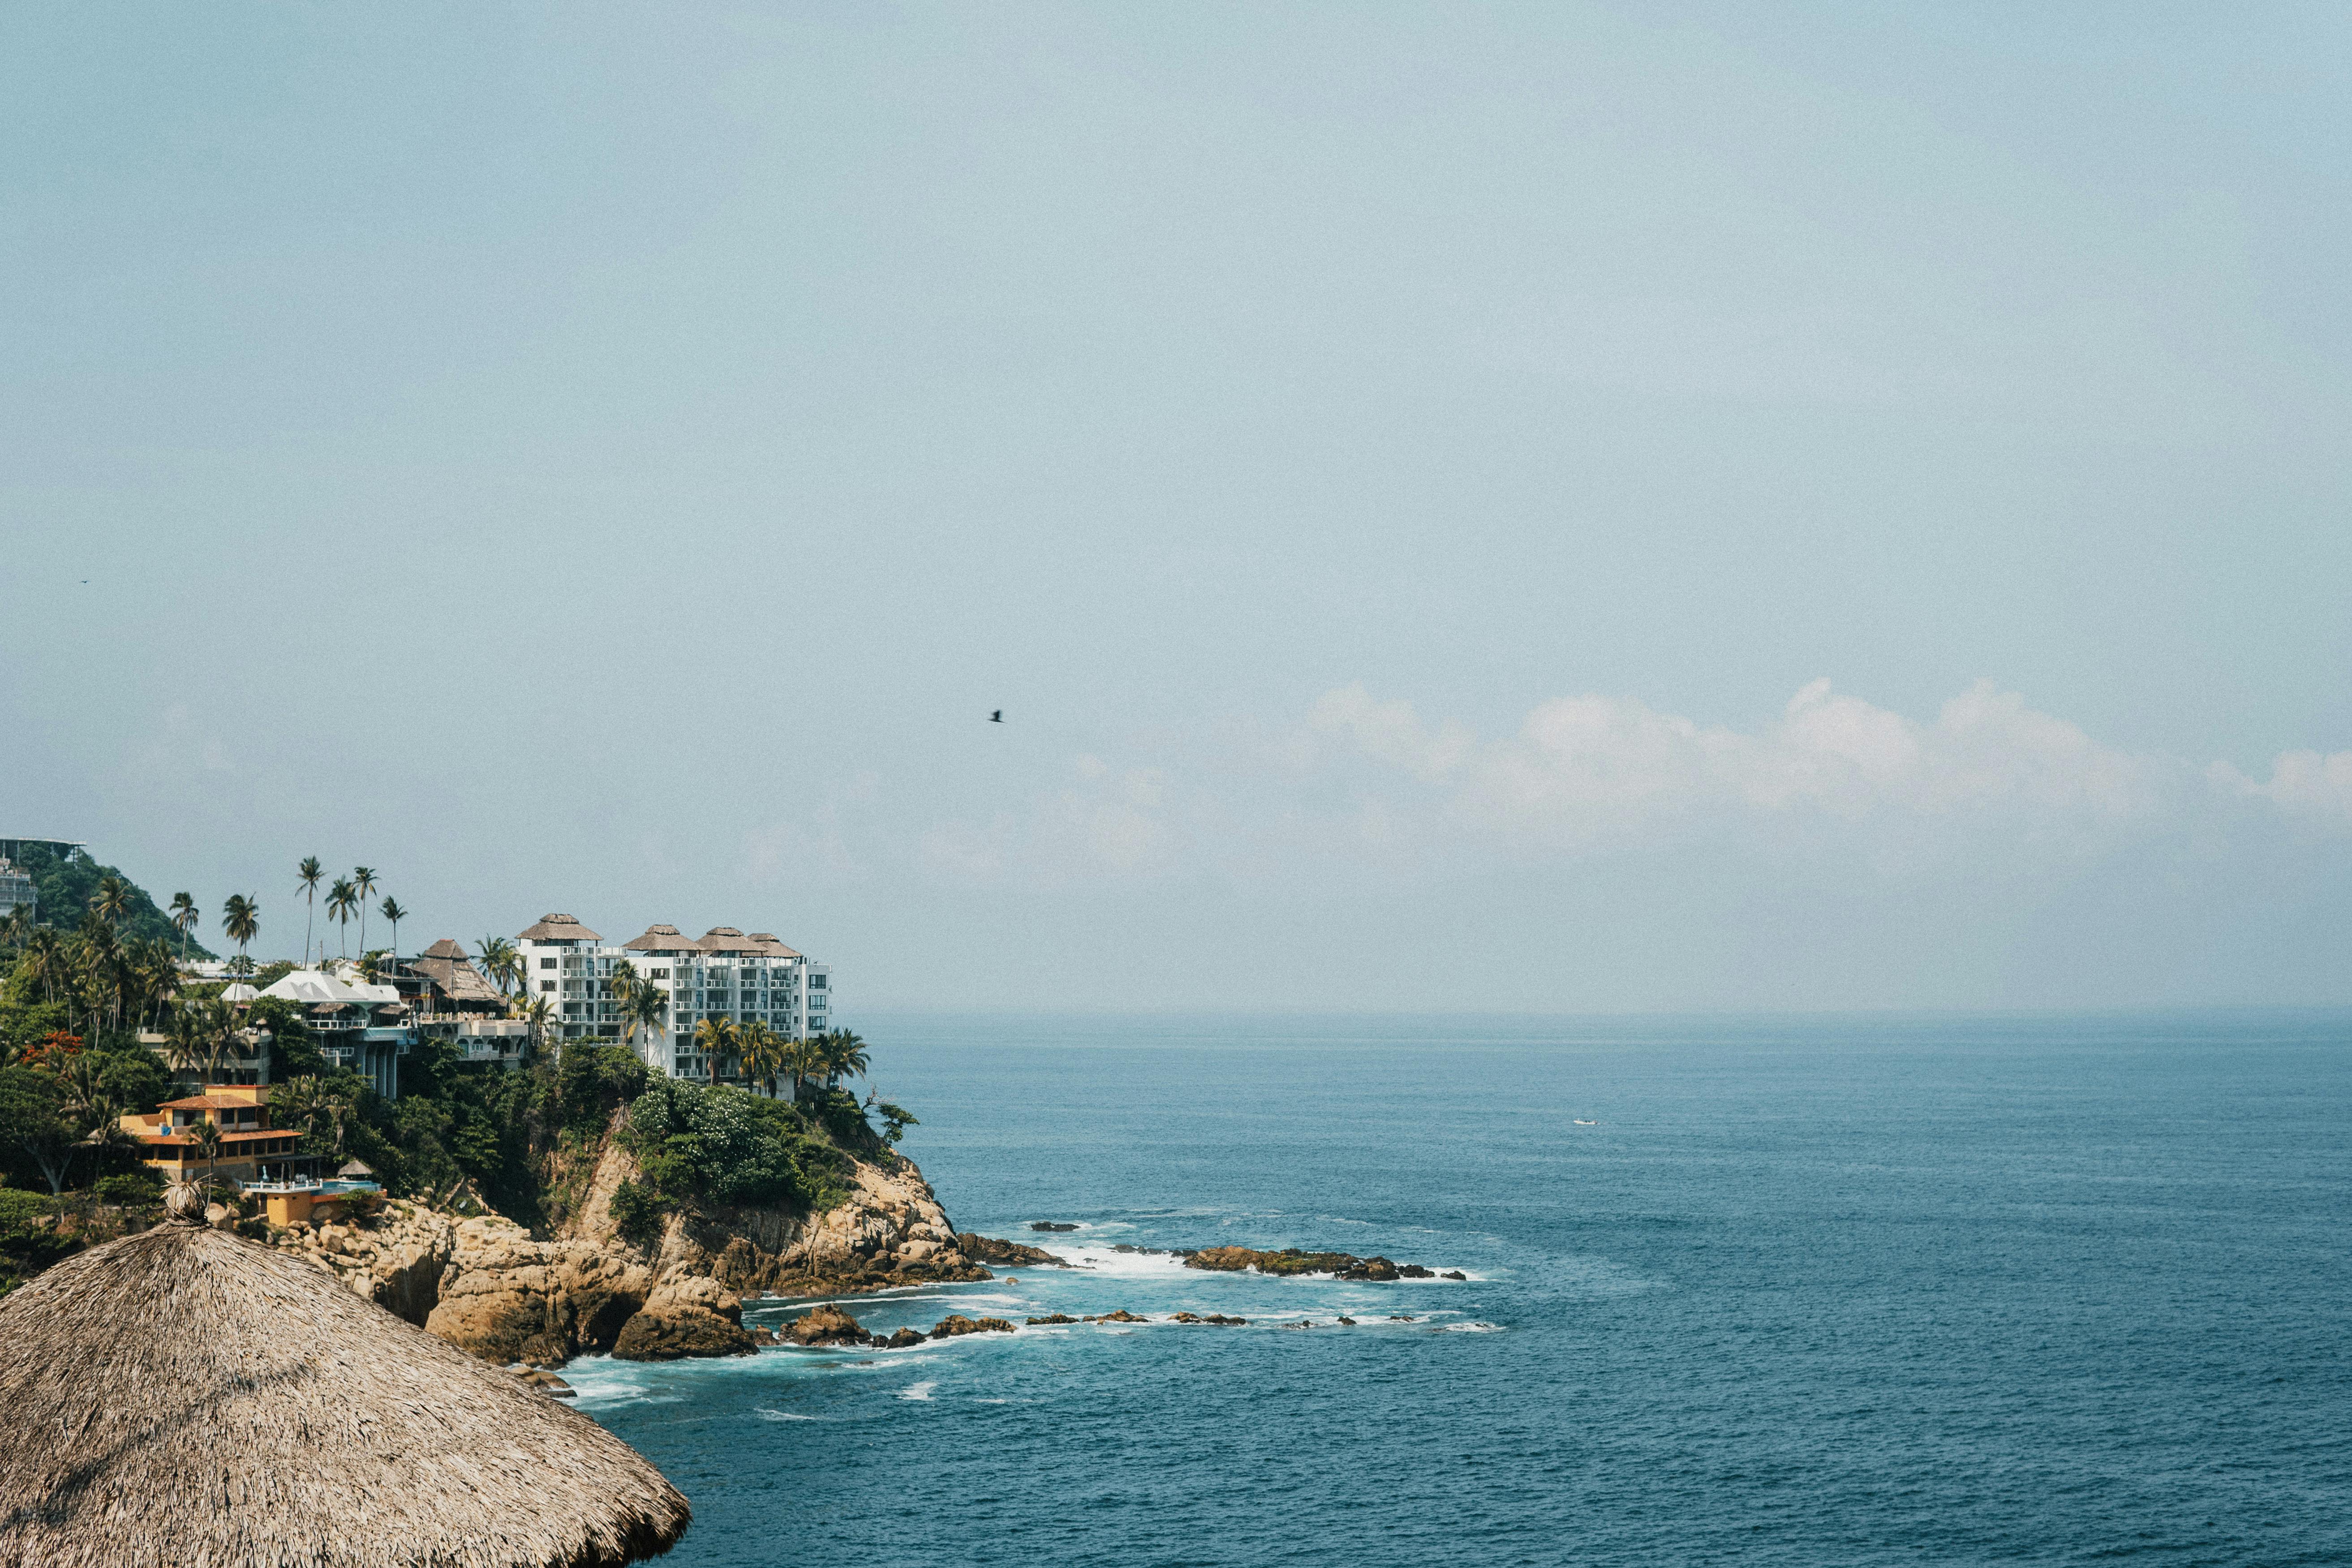 Acapulco Photos, Download The BEST Free Acapulco Stock Photos & HD Images